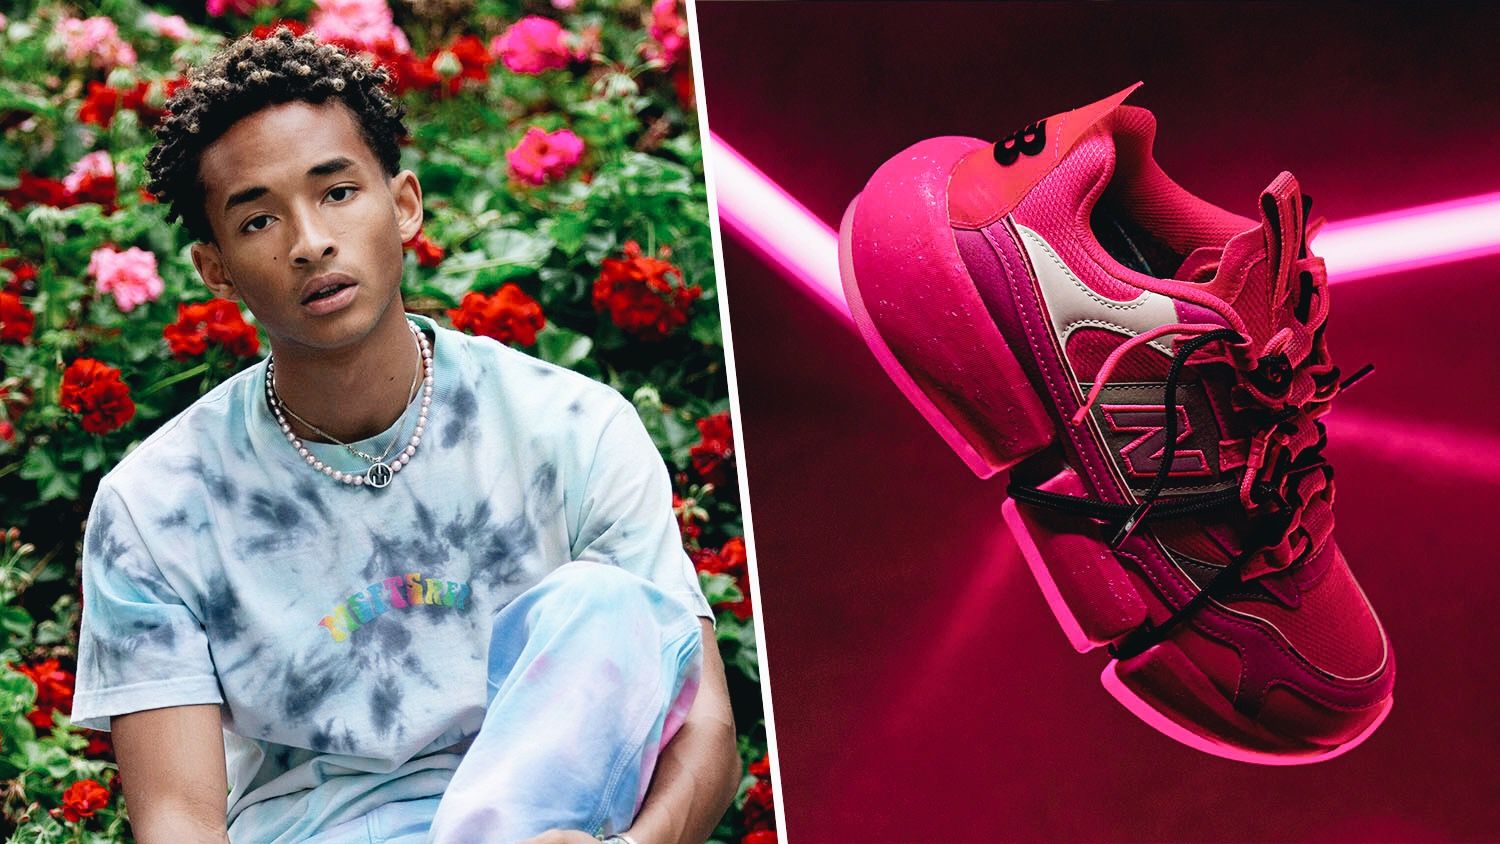 Jaden Smith Signs Deal With New Balance, Featured In Campaign Video